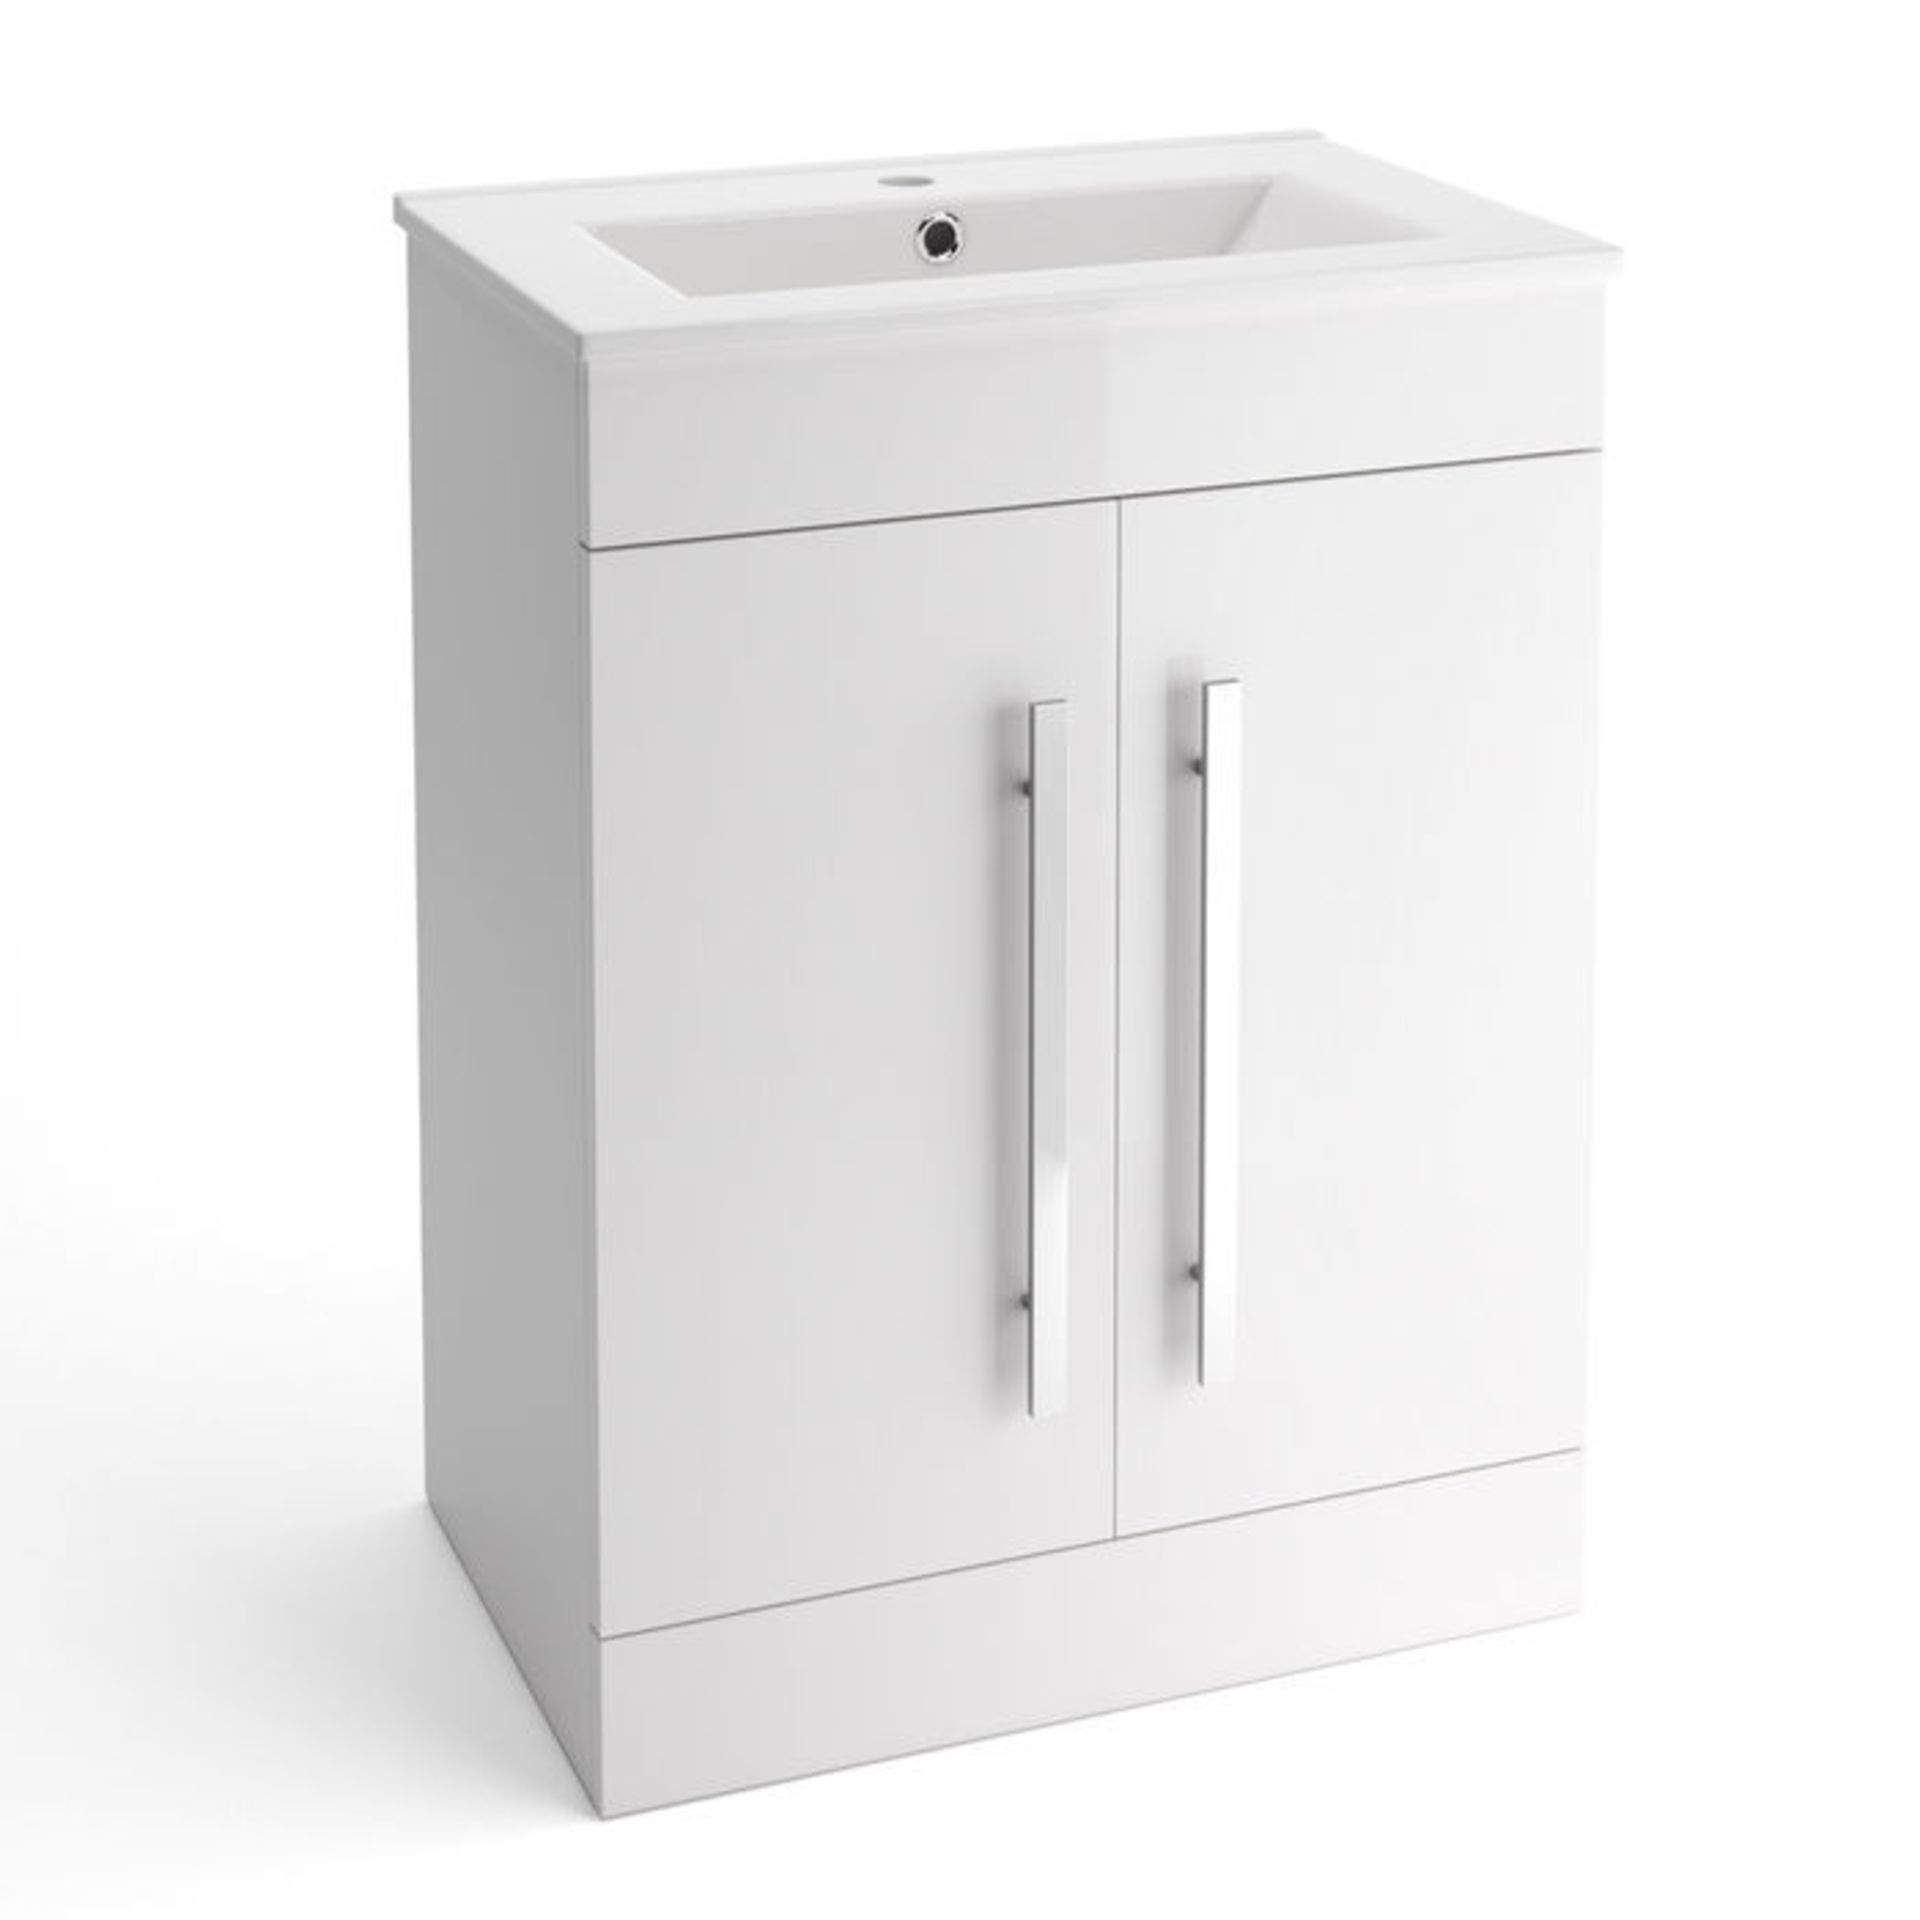 (A67) 600mm Avon High Gloss White Sink Cabinet - Floor Standing. Comes complete with basin. Re... - Image 3 of 4